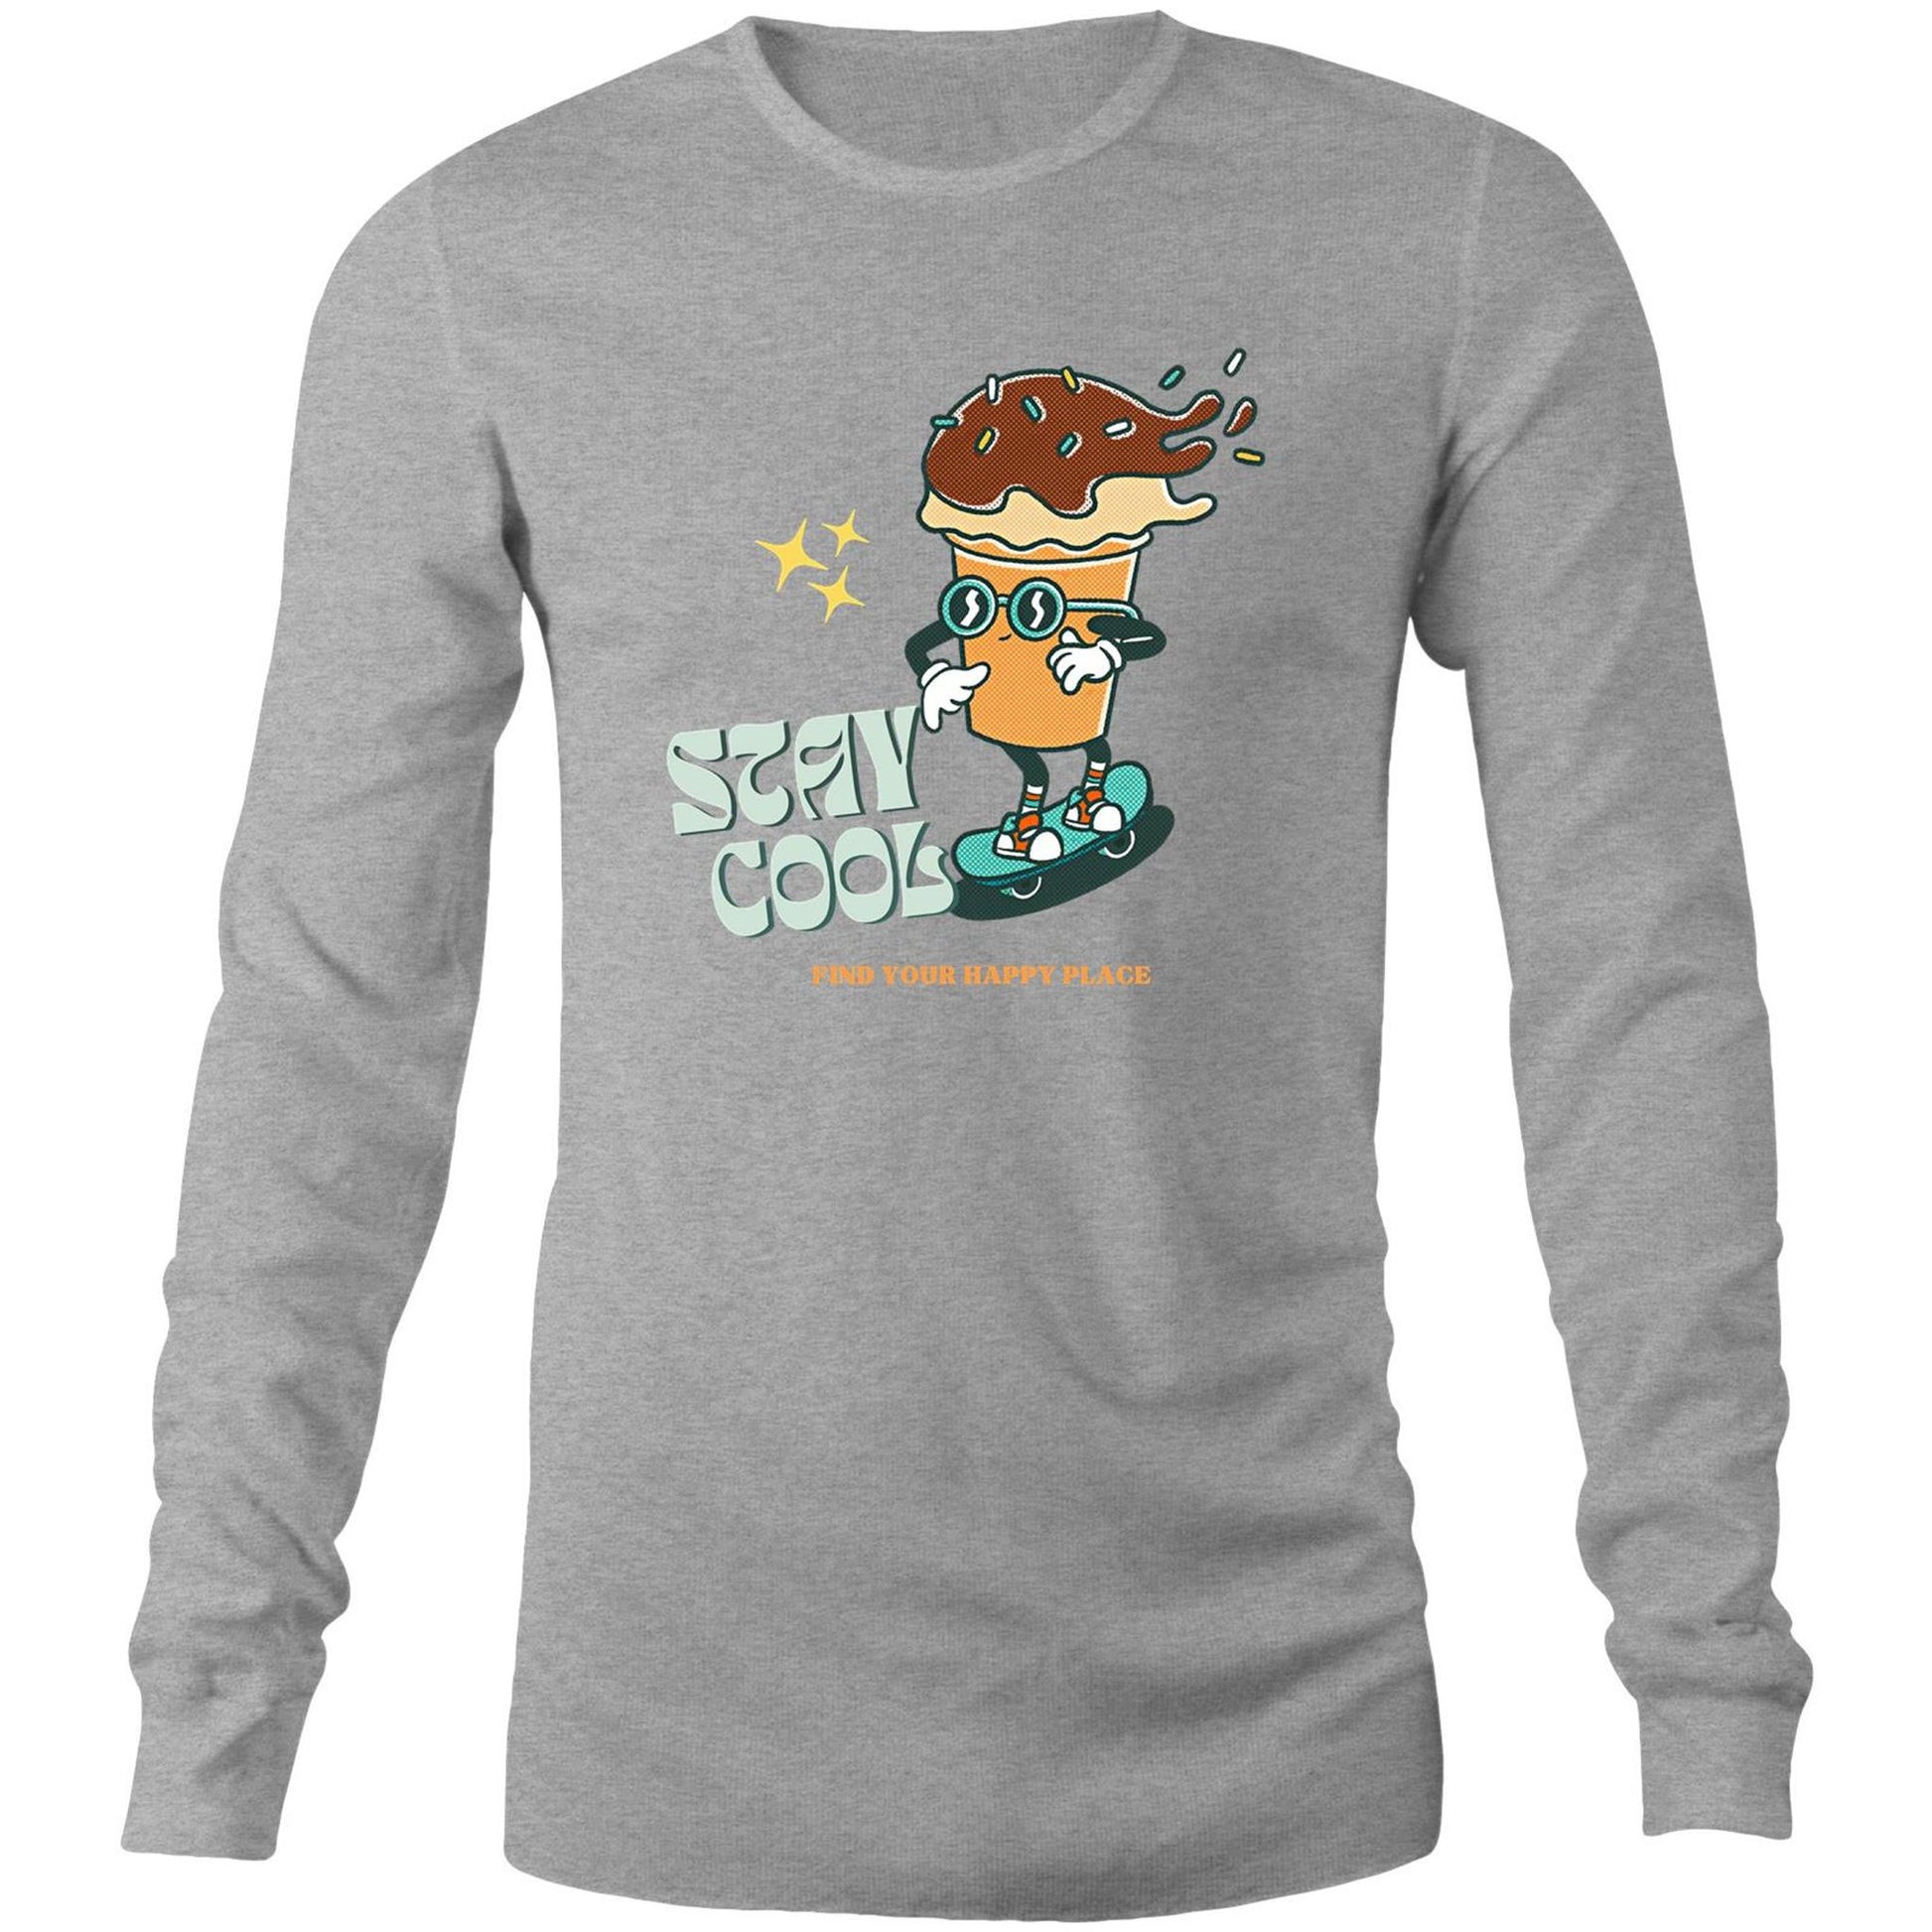 Stay Cool, Find Your Happy Place - Long Sleeve T-Shirt Grey Marle Unisex Long Sleeve T-shirt Retro Summer